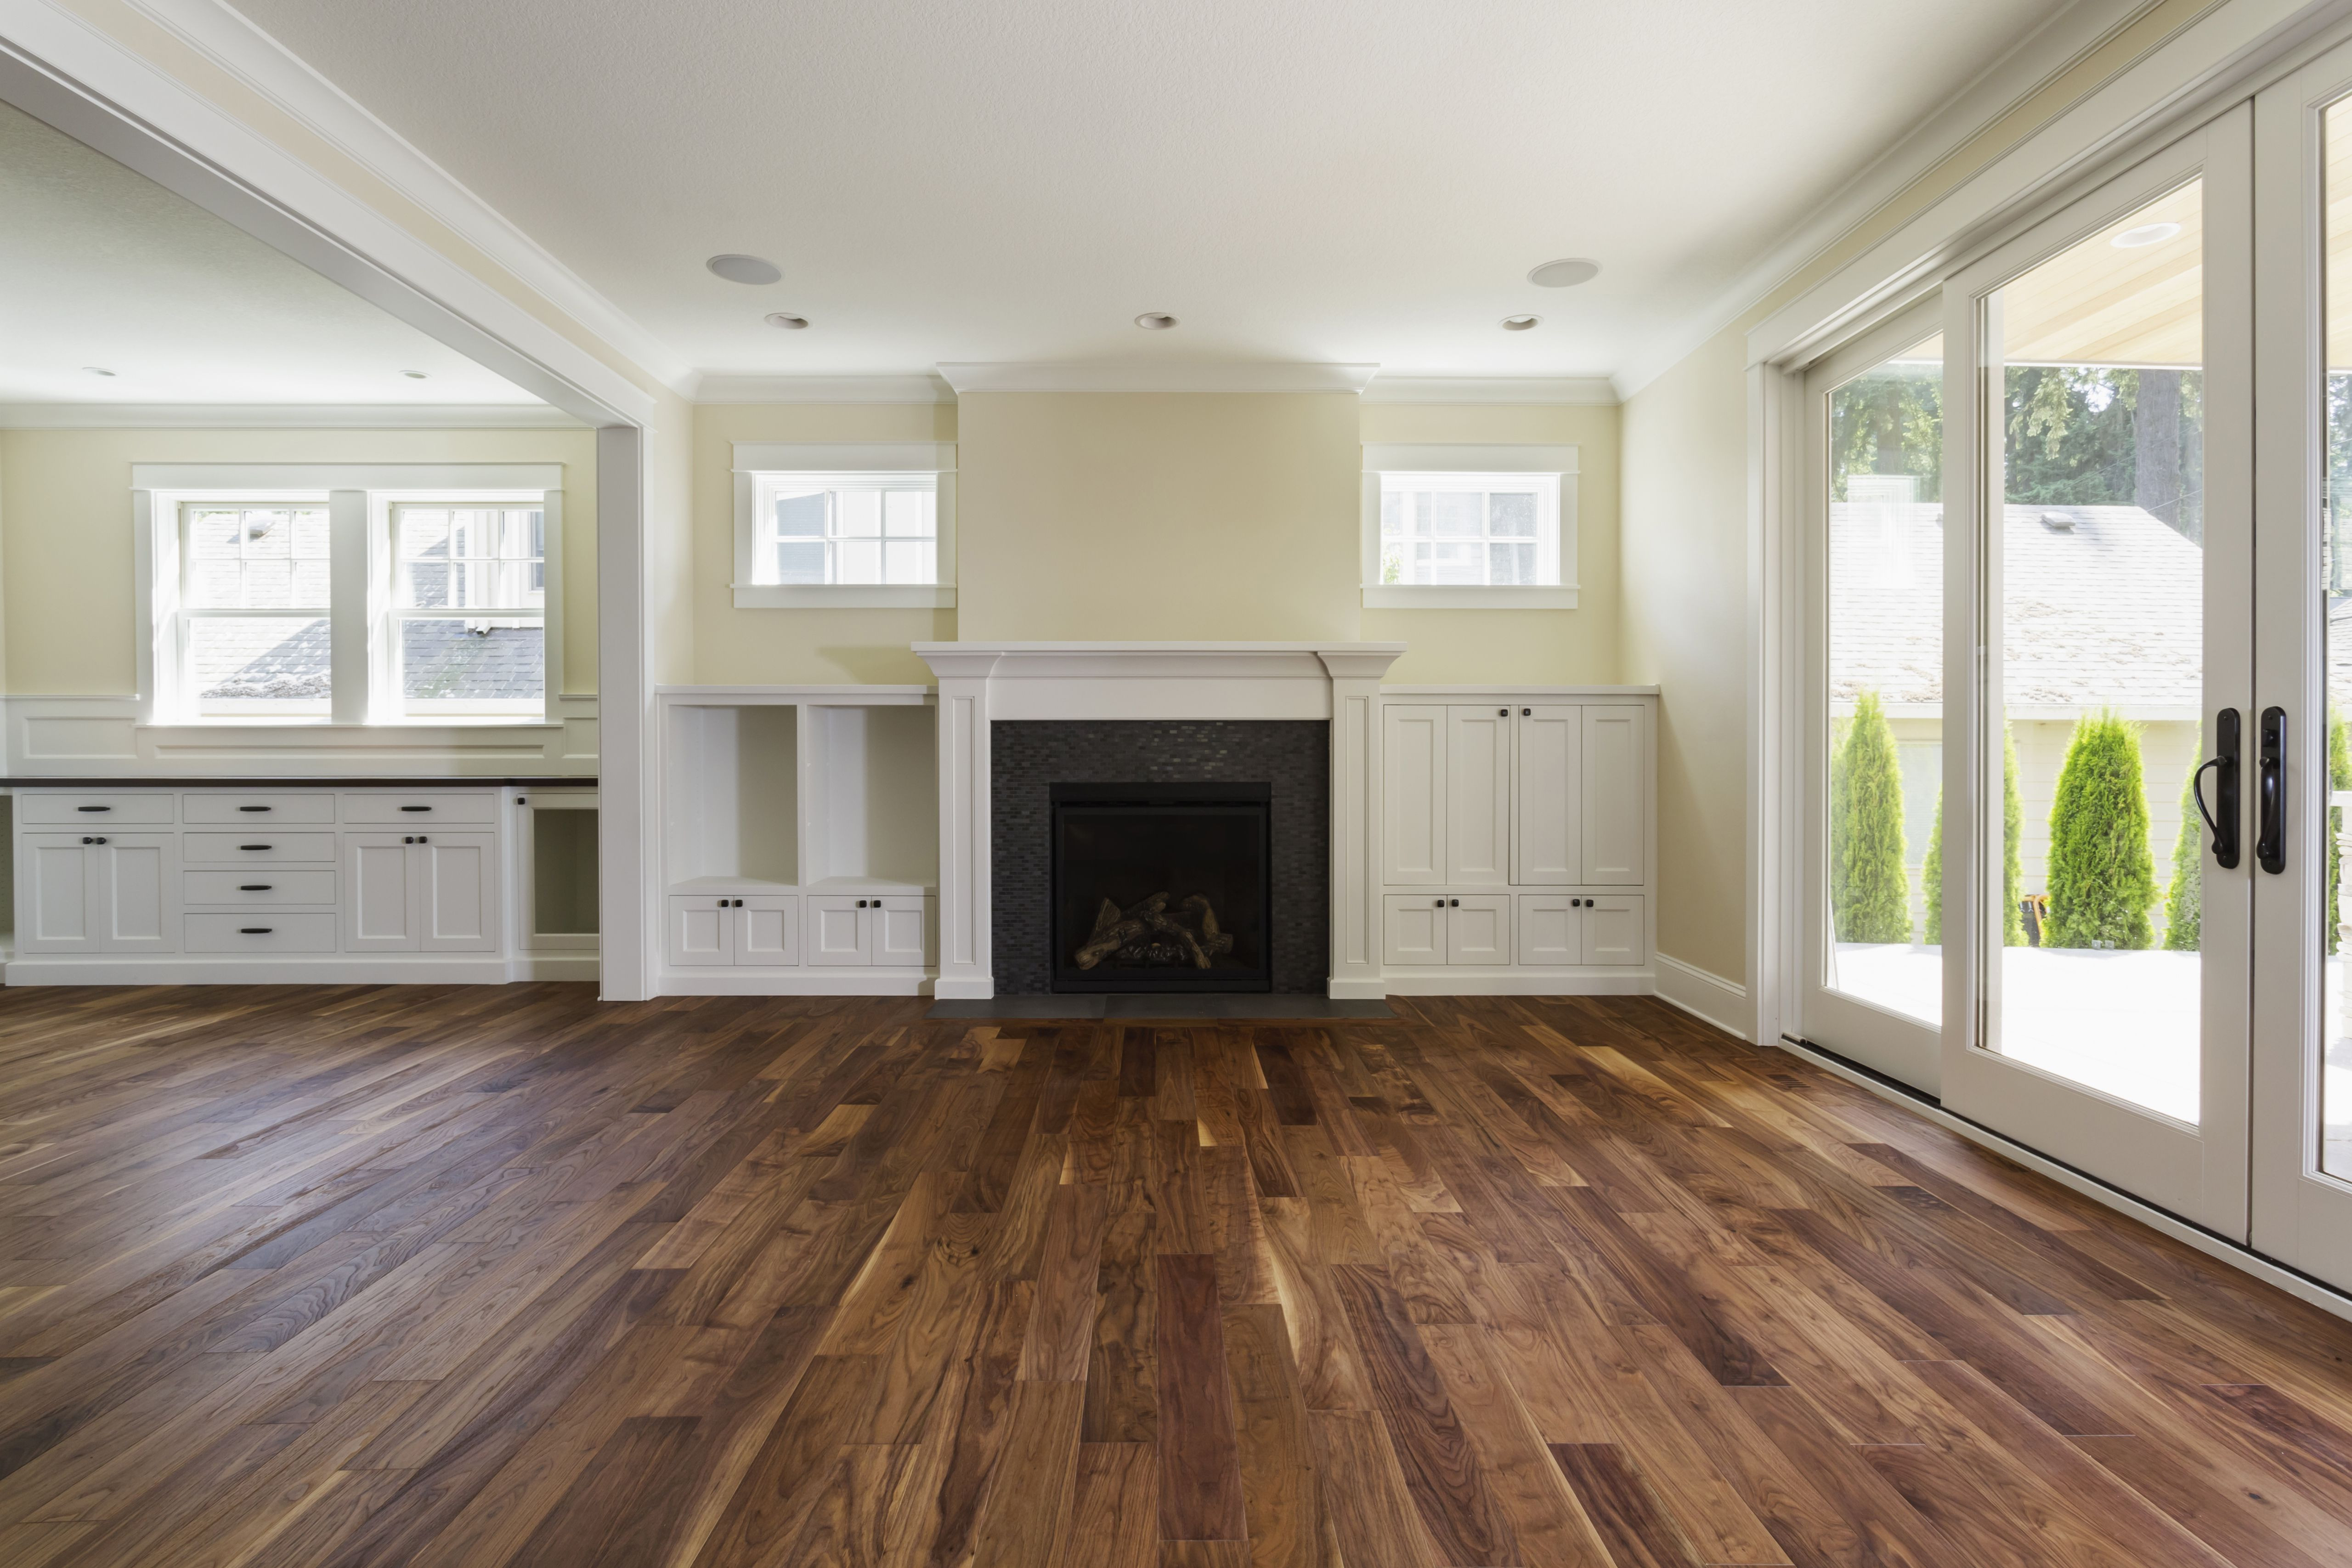 16 Perfect How Much Does It Cost to Refinish Hardwood Floors Myself 2024 free download how much does it cost to refinish hardwood floors myself of the pros and cons of prefinished hardwood flooring within fireplace and built in shelves in living room 482143011 57bef8e33df78cc1